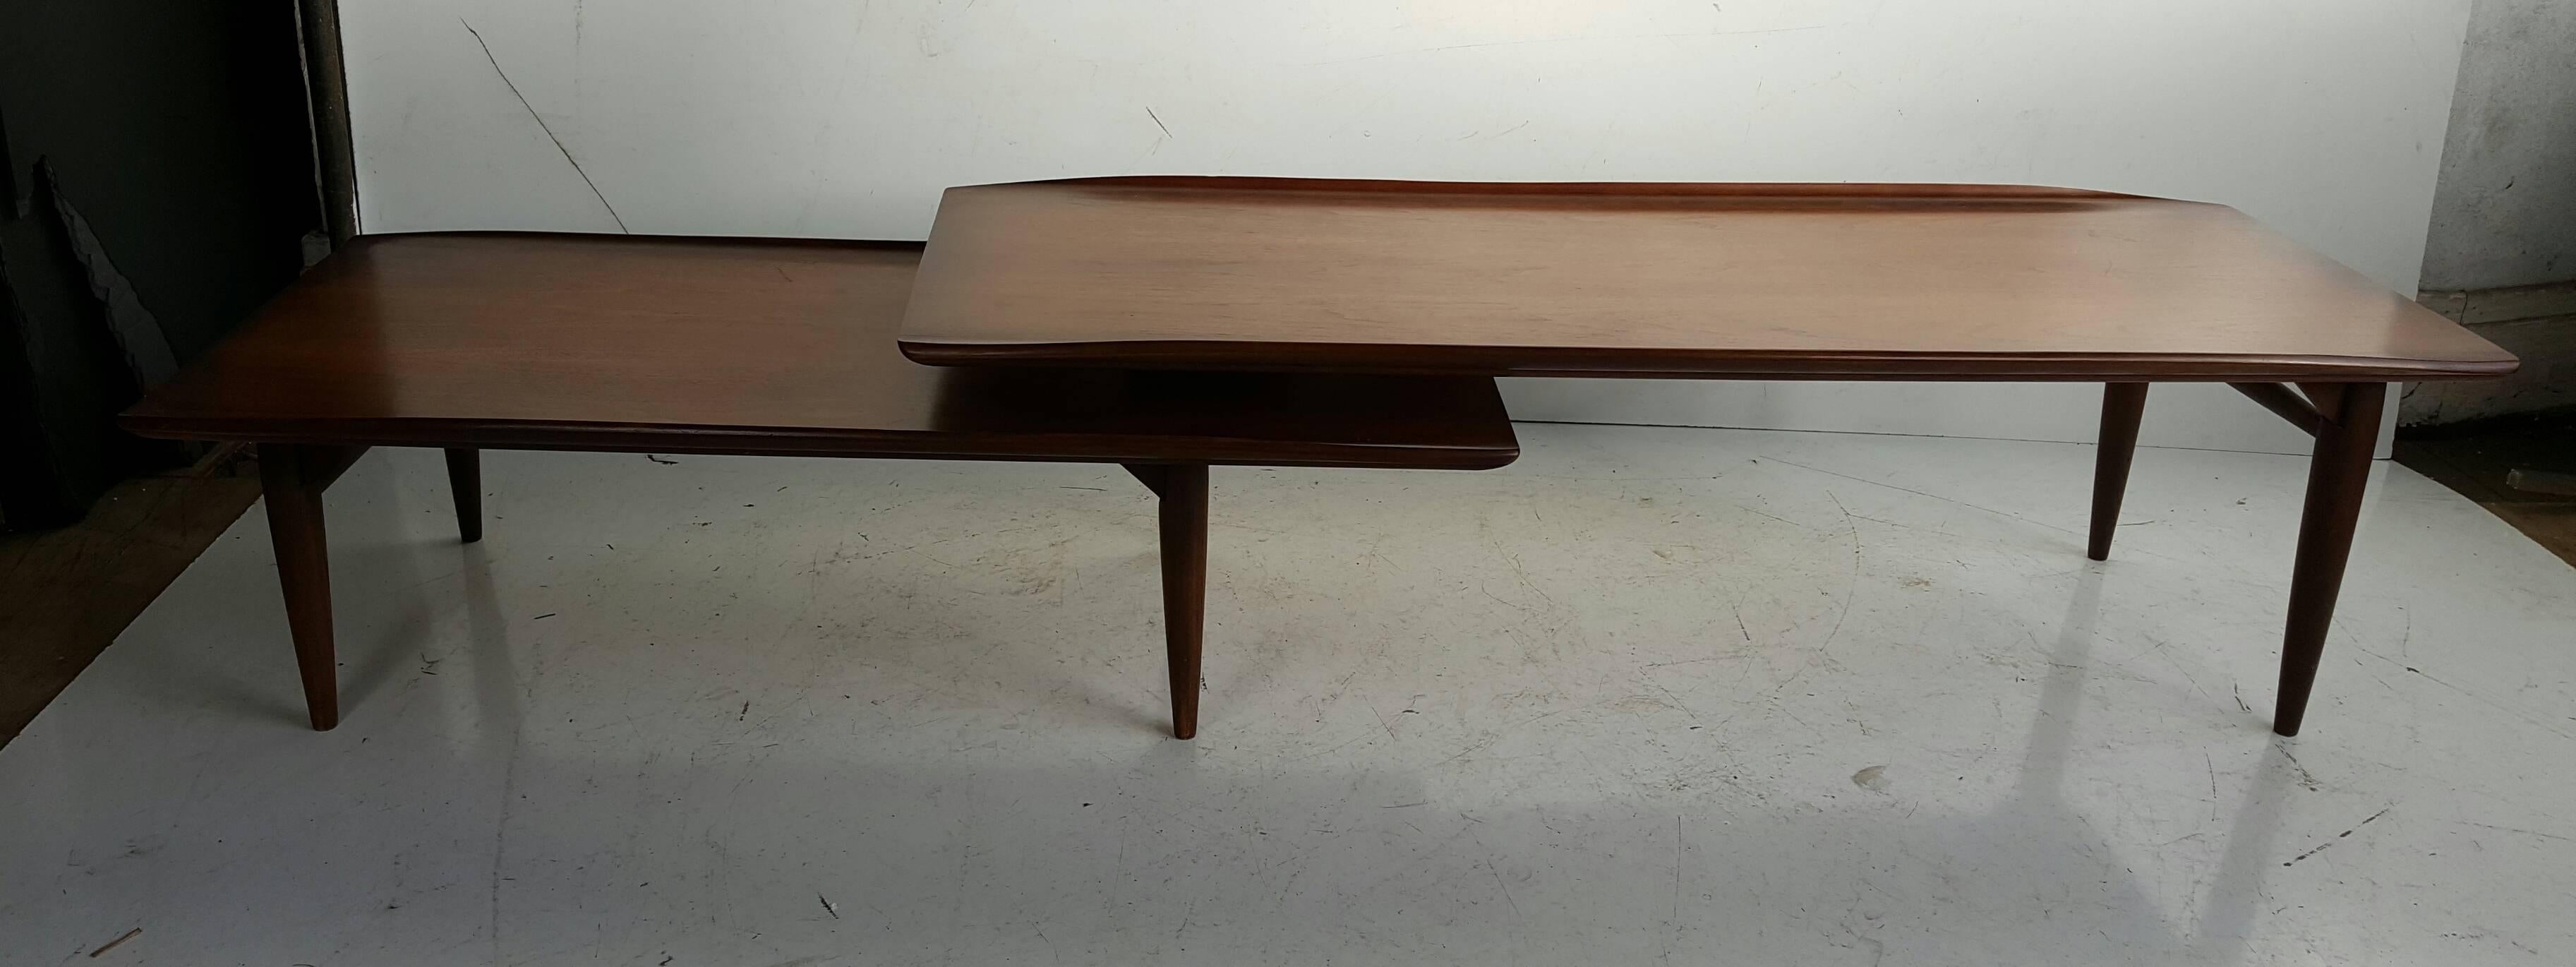 Rare version of the classic Lane cocktail table,, Solid figured walnut,Two-tier pivoting swing out,,Table measures 51